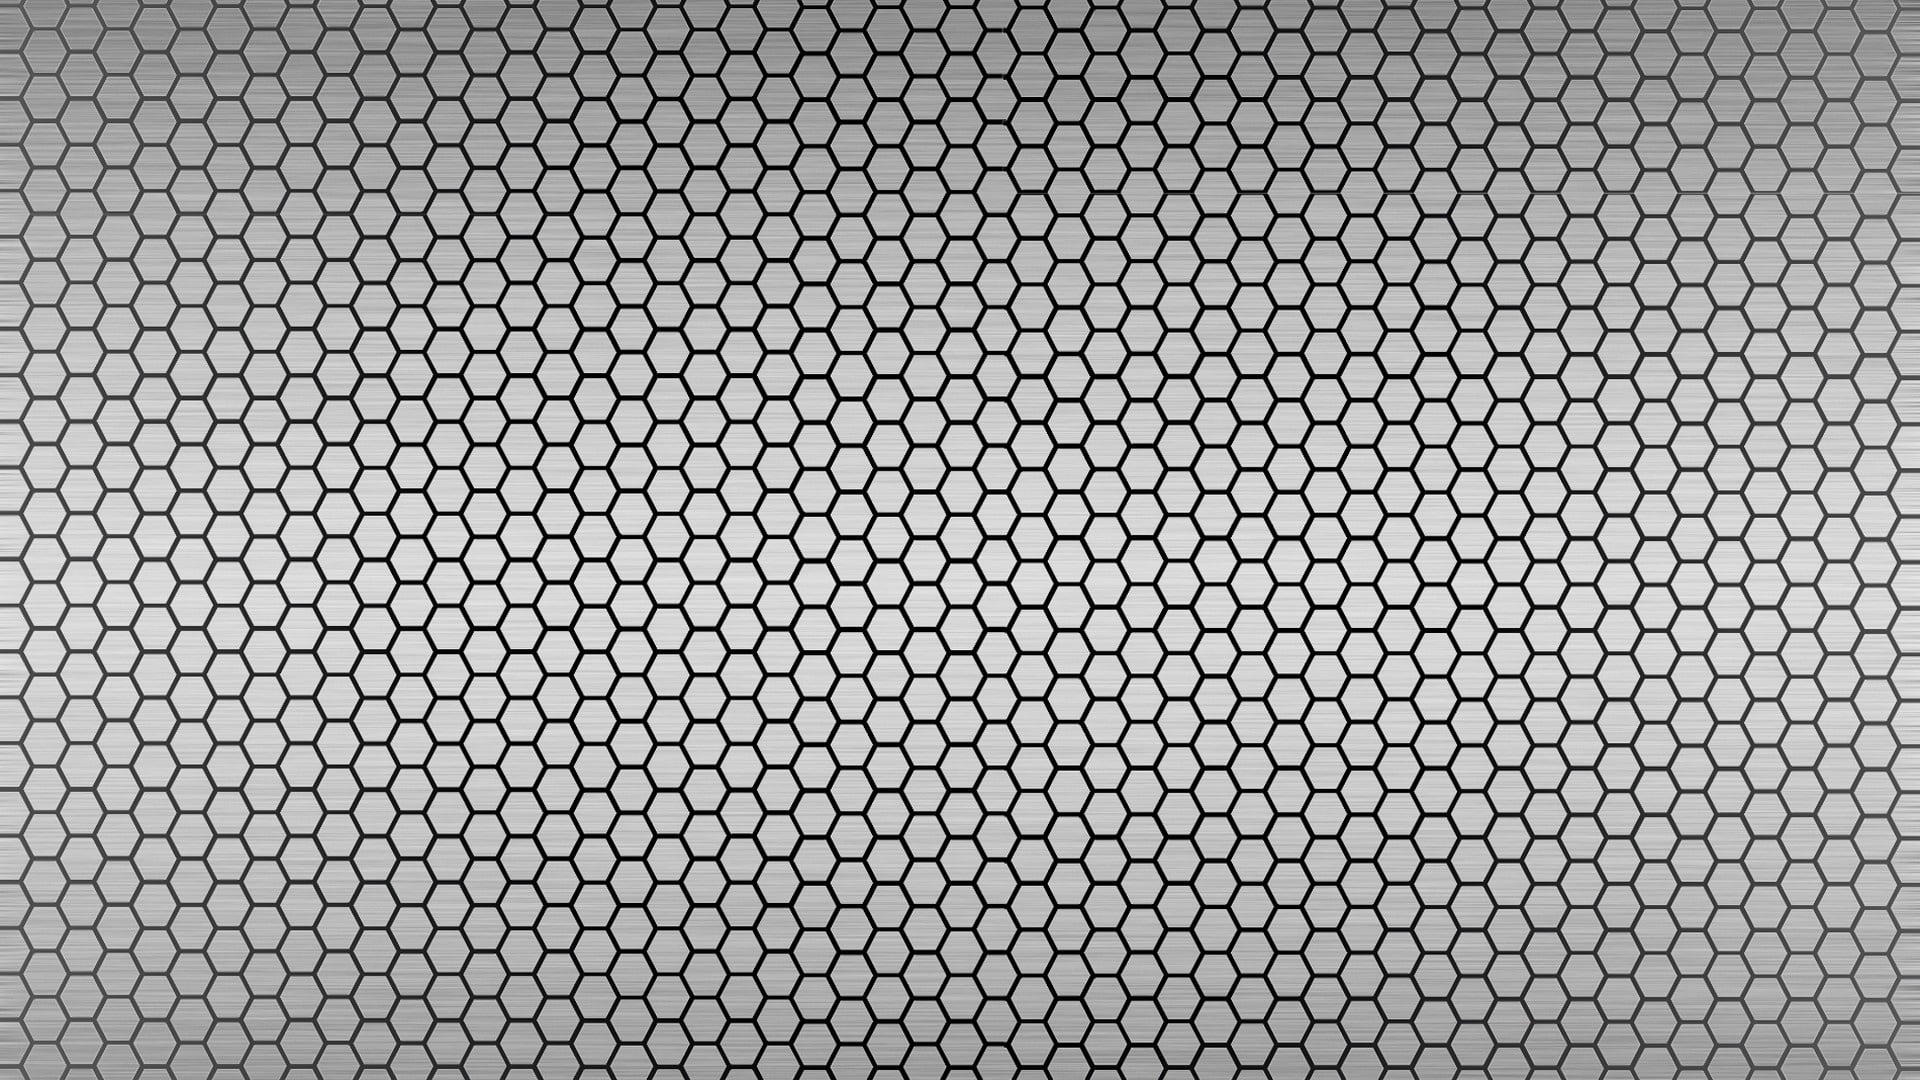 mesh, light, background, texture, backgrounds, pattern, abstract